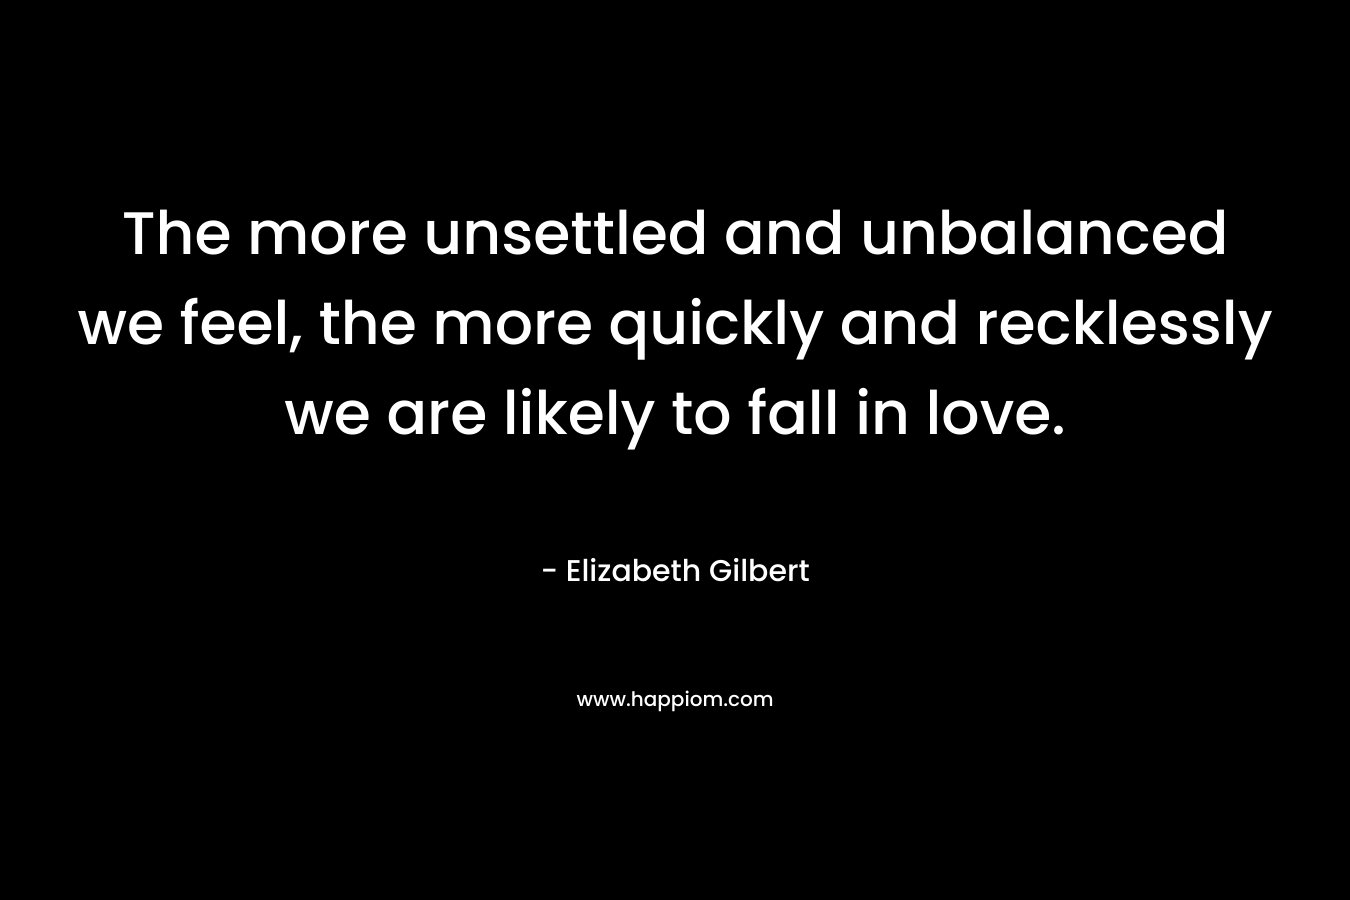 The more unsettled and unbalanced we feel, the more quickly and recklessly we are likely to fall in love.